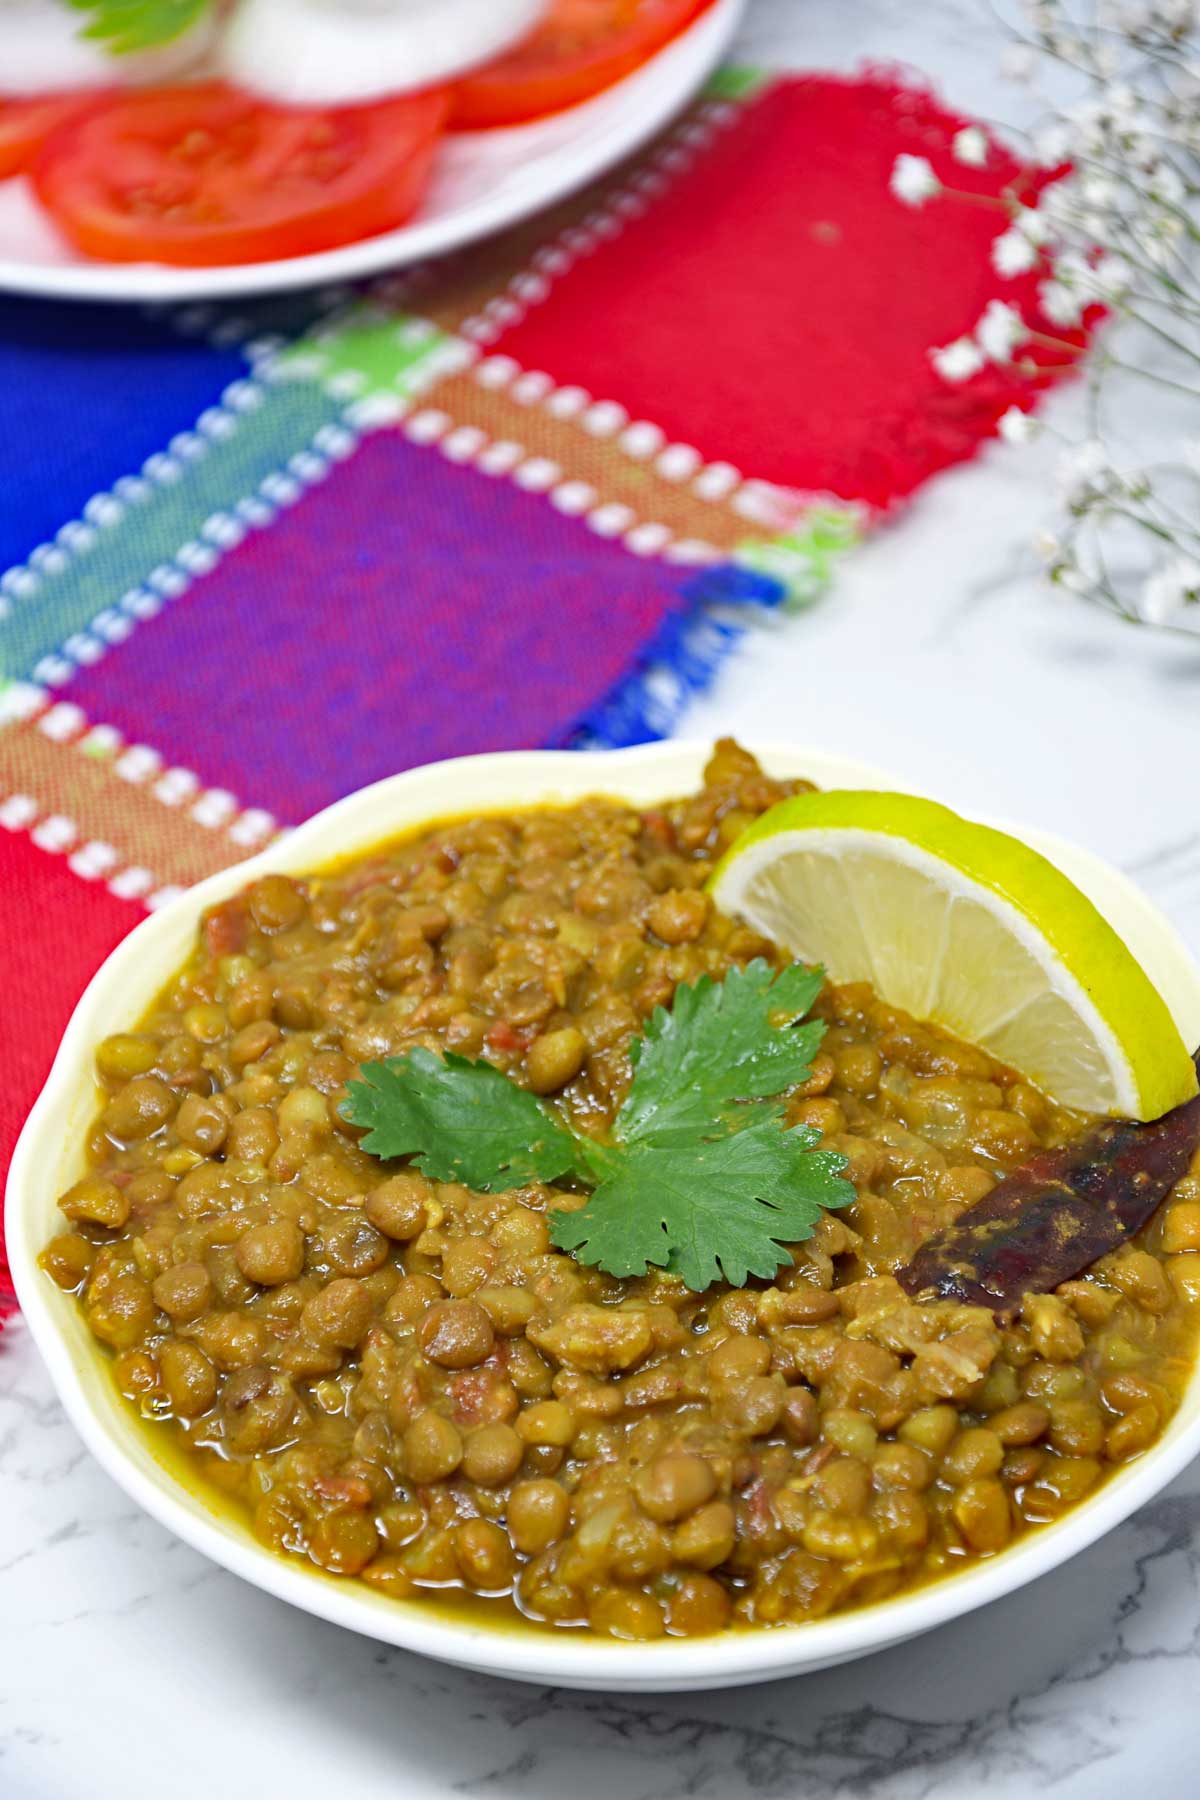 Whole Masoor Dal curry in a serving bowl.